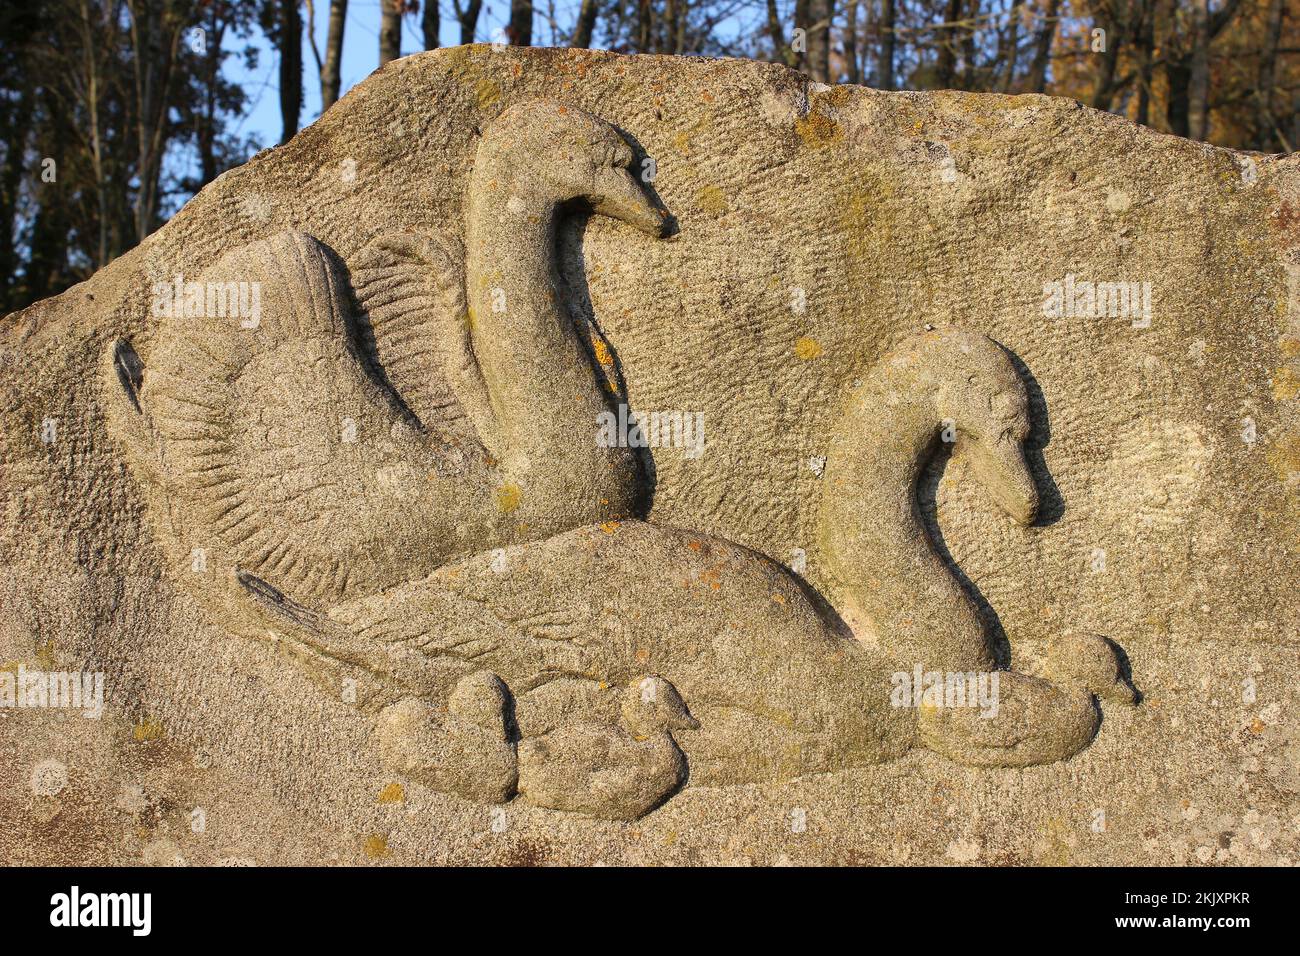 Stone Carving Swans With Cygnets Stock Photo